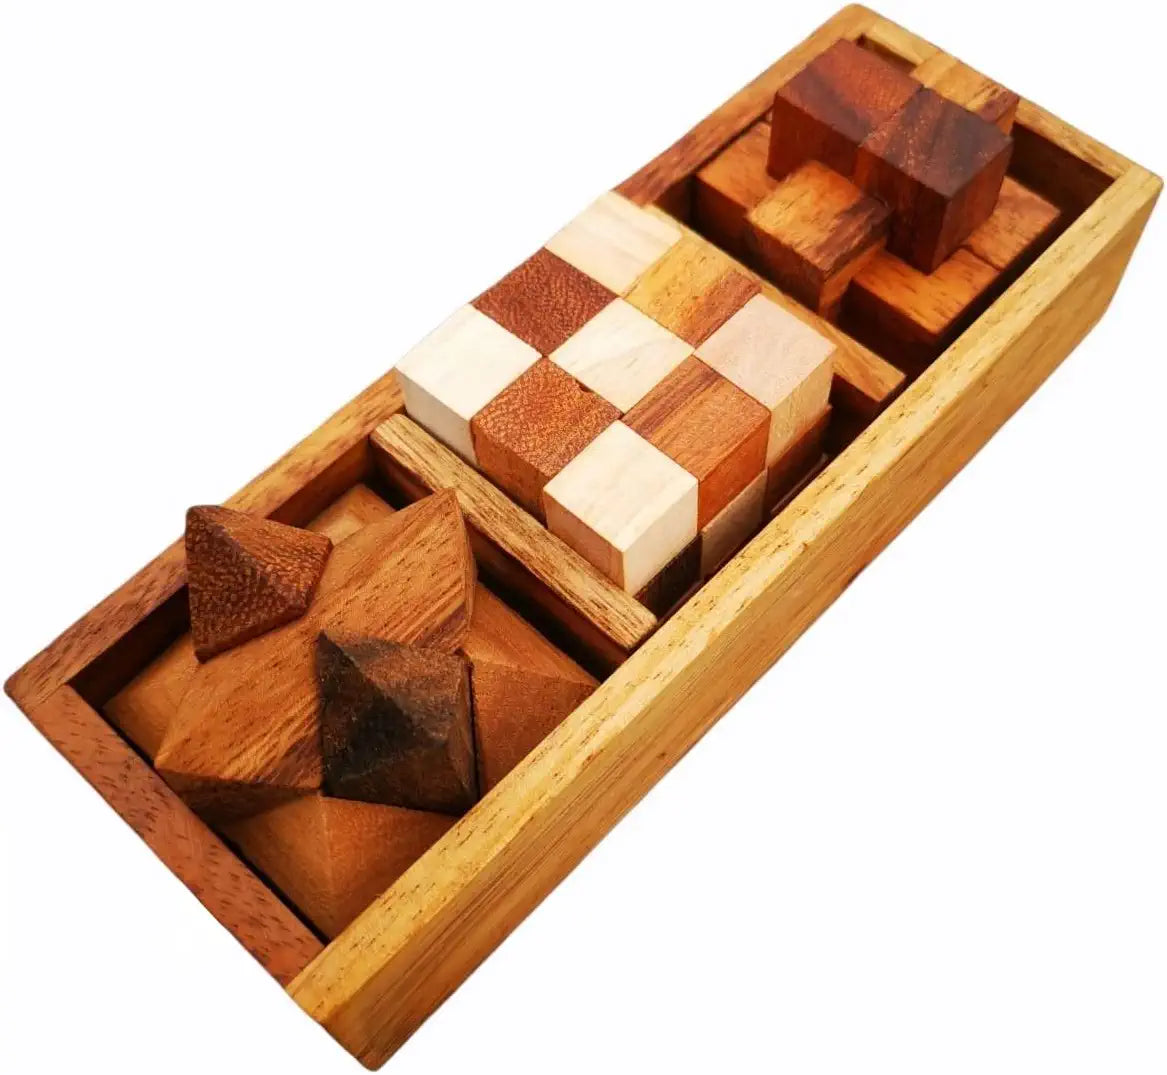 3 in 1 Set Wooden Games Brain Teaser Wood Toy Desk Puzzle Coffee Table Decor Broad Game 3D Puzzle for Teens and Adults Fun Games Indoor Outdoor Camping Decorate Table Top Halloween Party